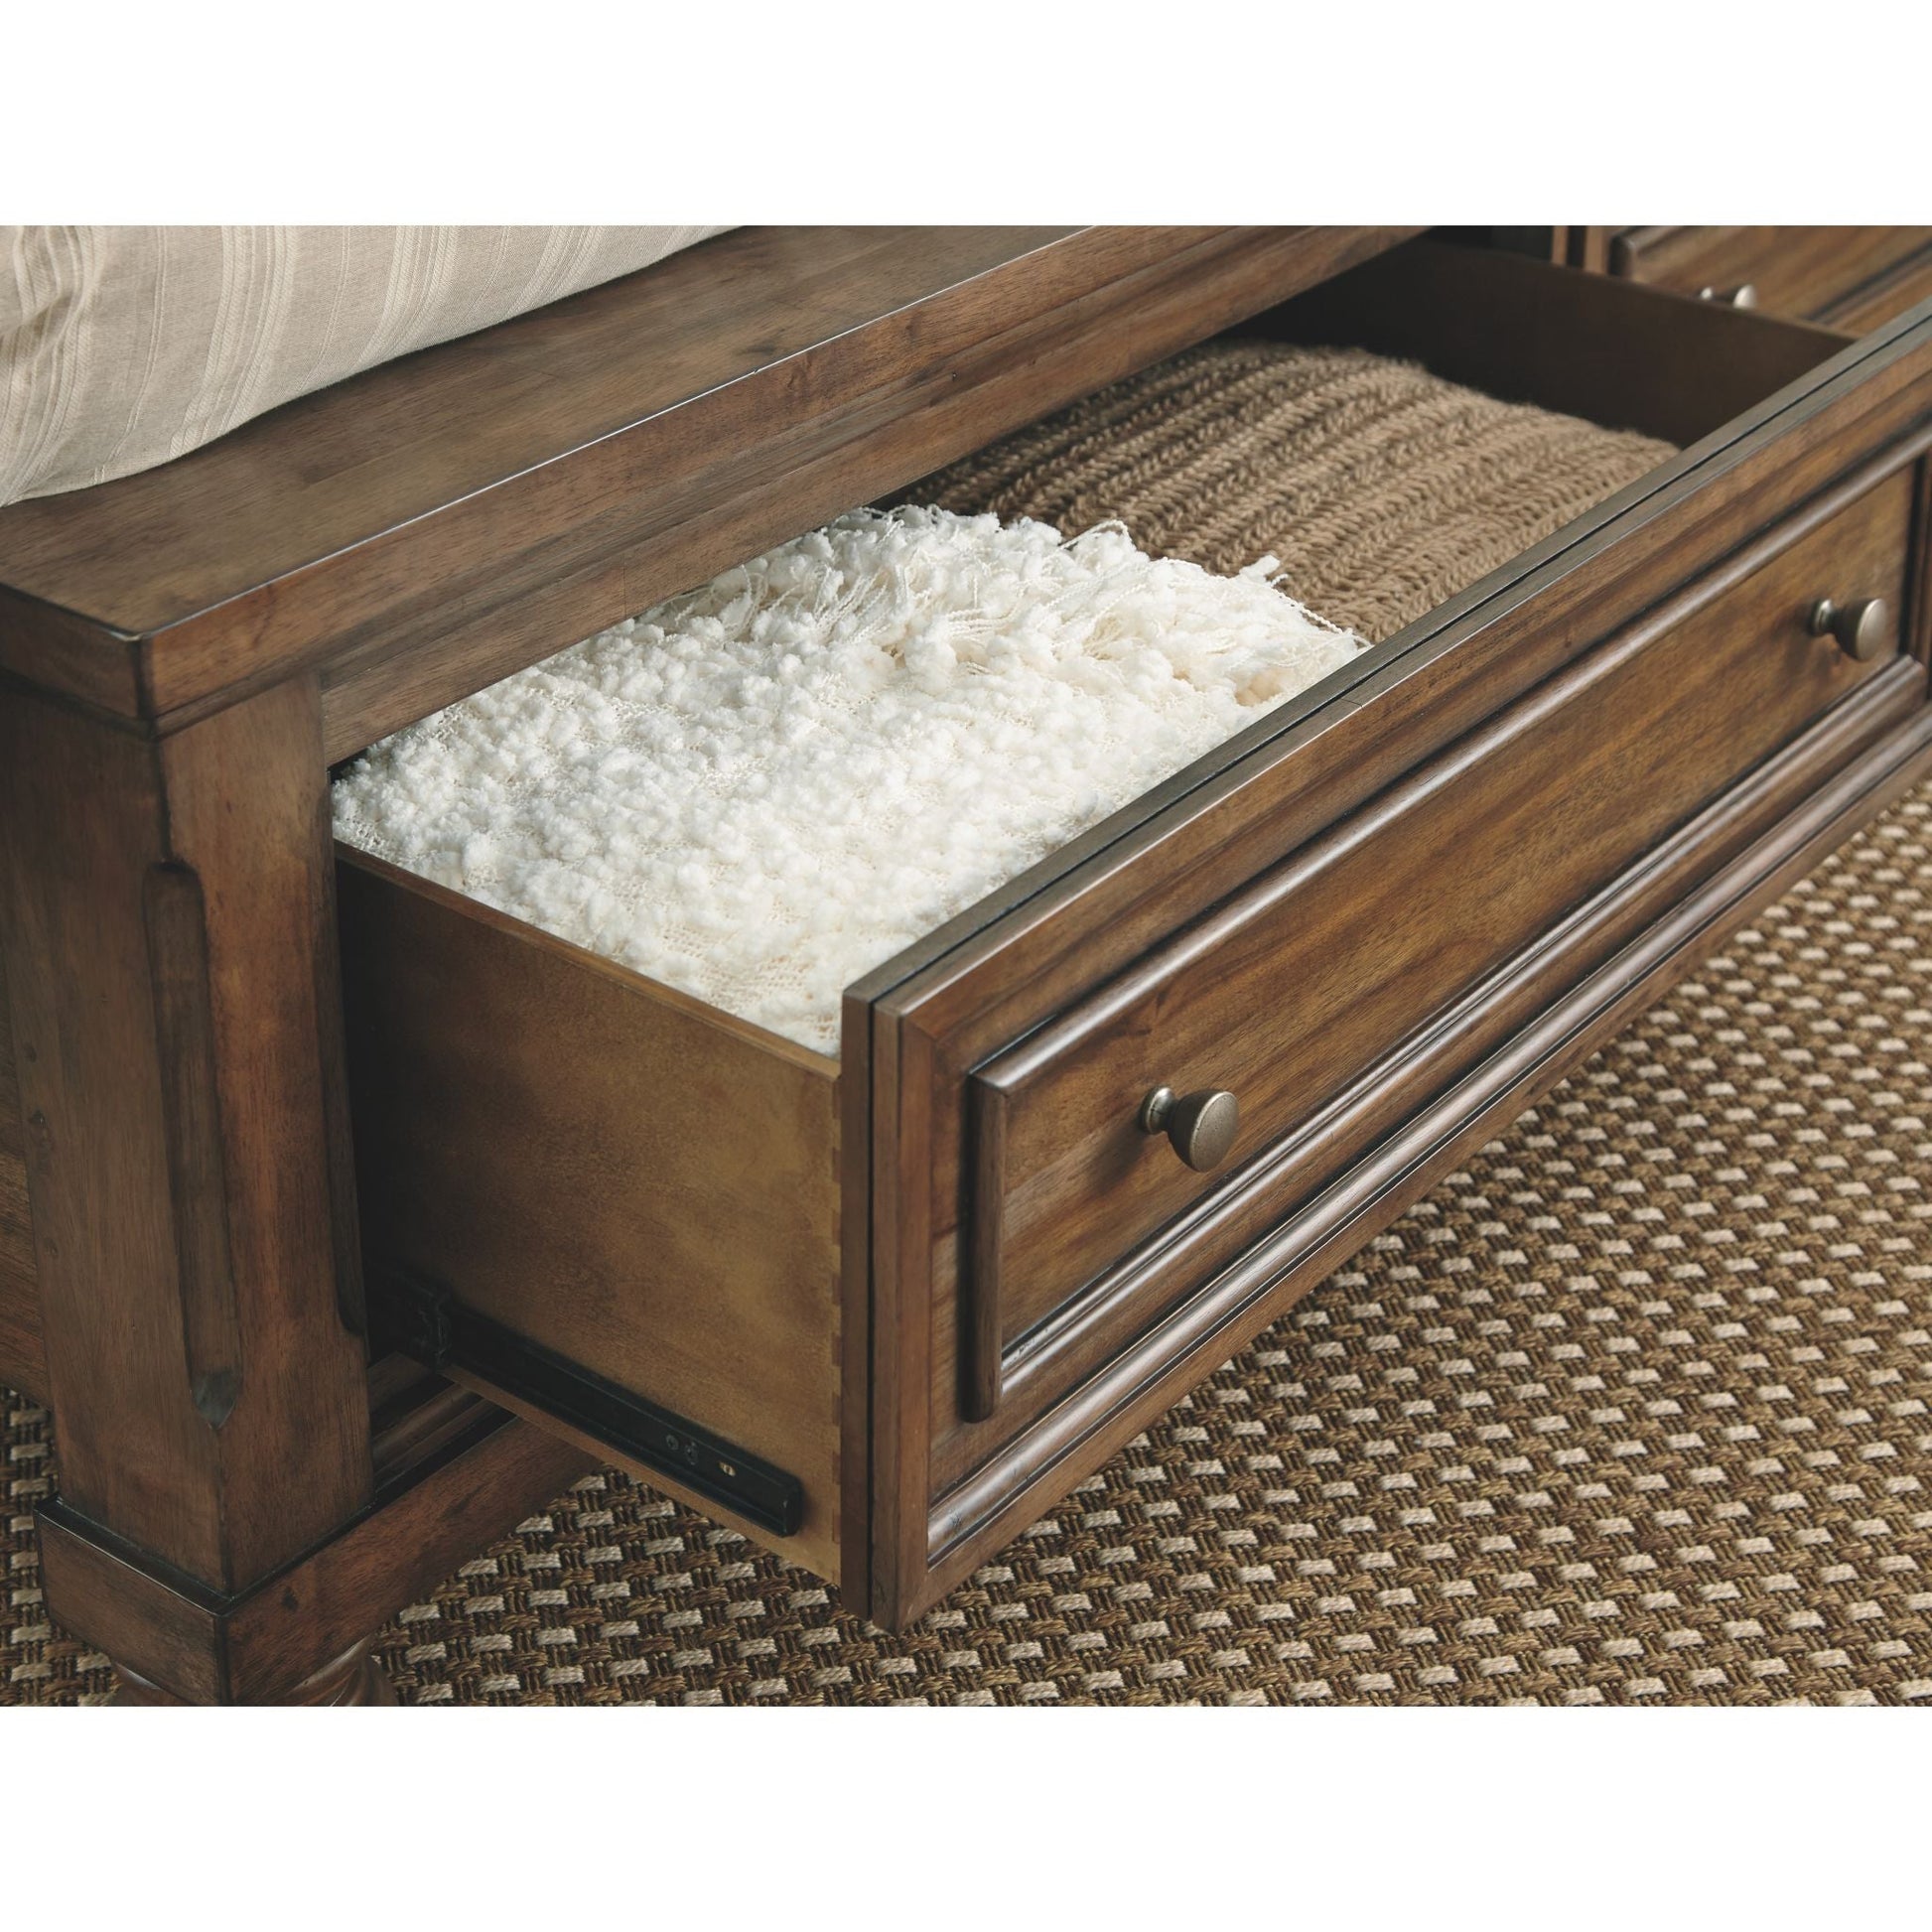 Baymore Panel Bed with Storage